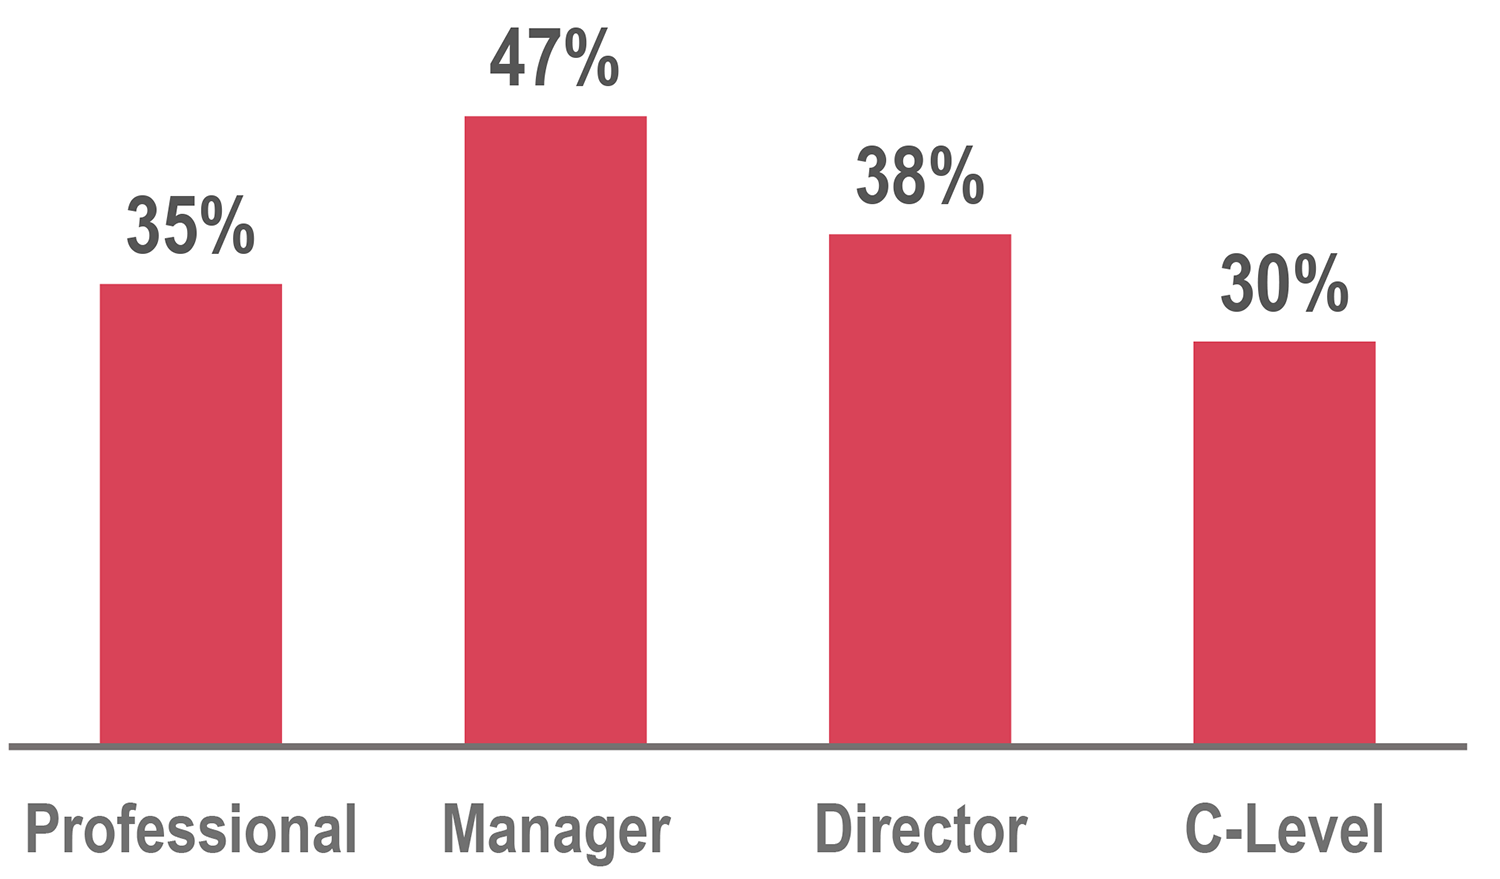 Bar graph: Professional 35%; Manager 47%; Director 38%; C-Level 30%.